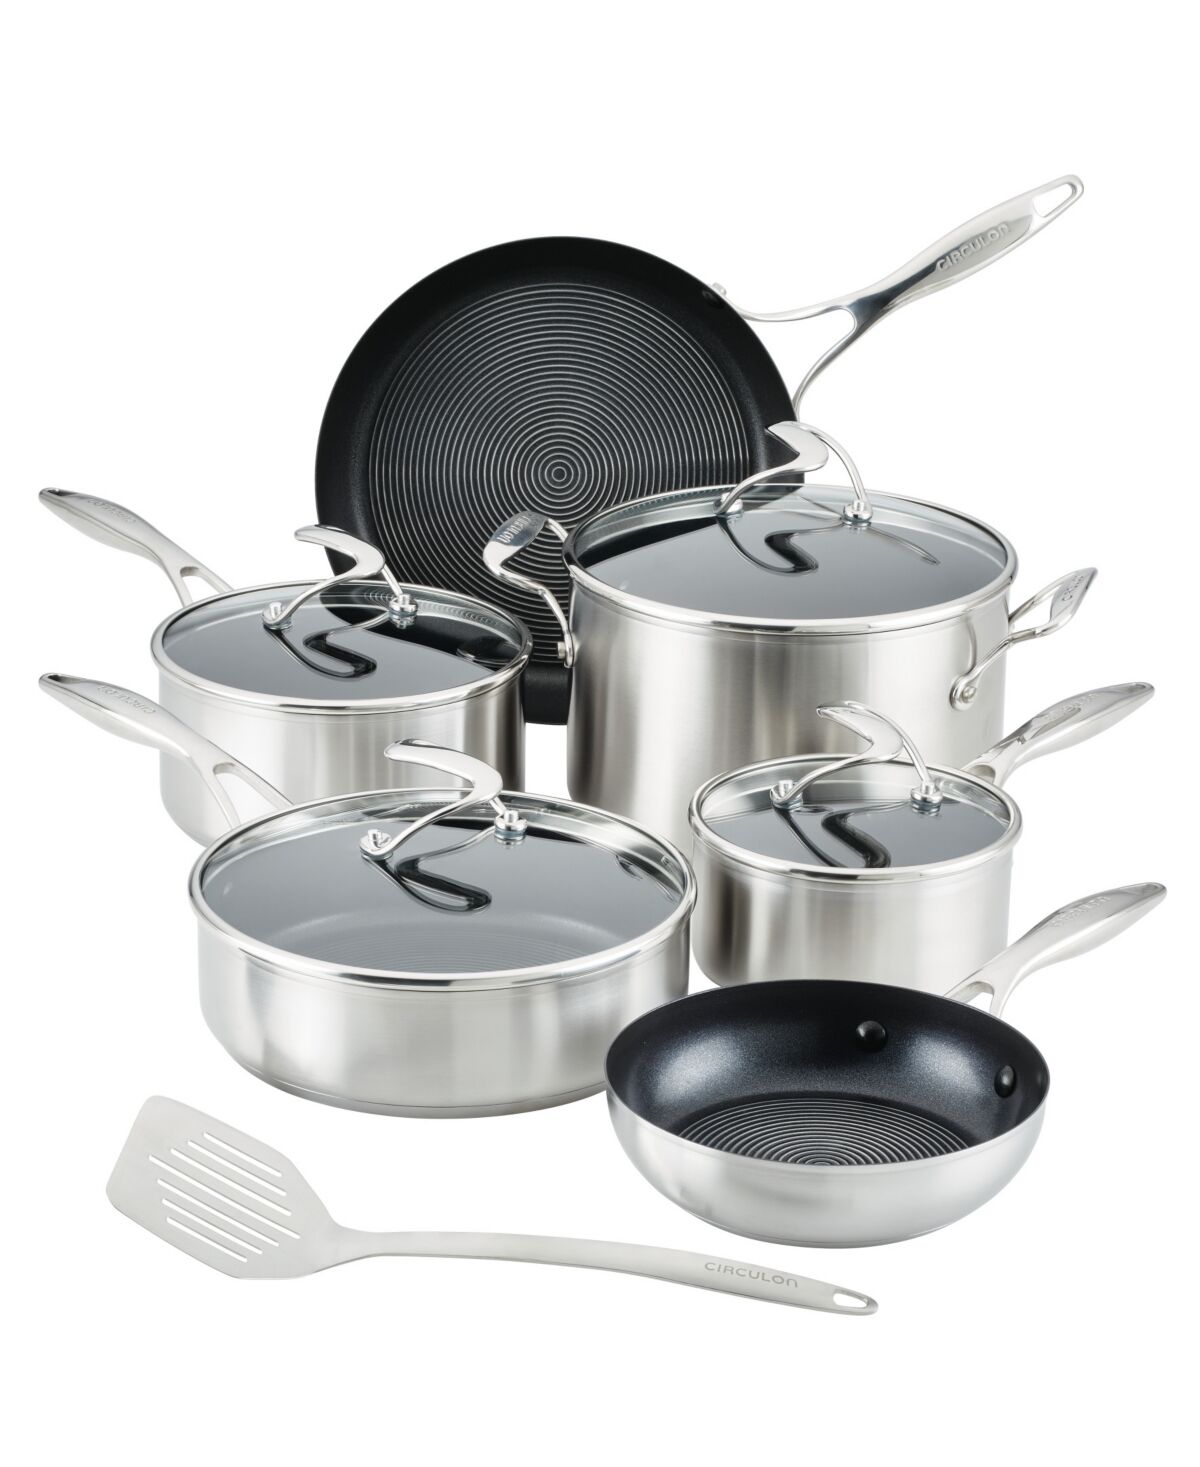 Circulon Stainless Steel Cookware Set with SteelShield Hybrid Stainless and Nonstick Technology, 11-piece, Silver - Silver